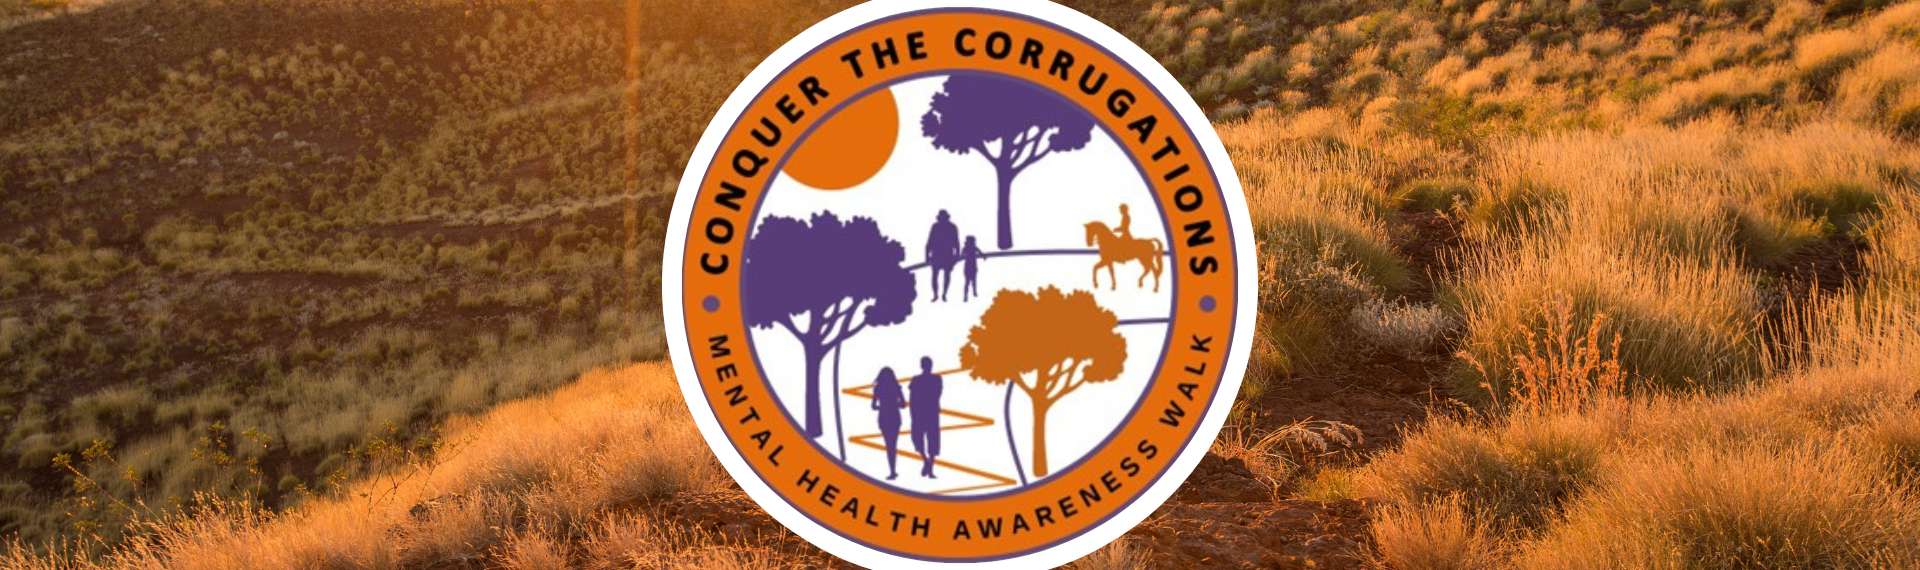 Join us for Conquer The Corrugations Victoria   - Mental Health Awareness Walk